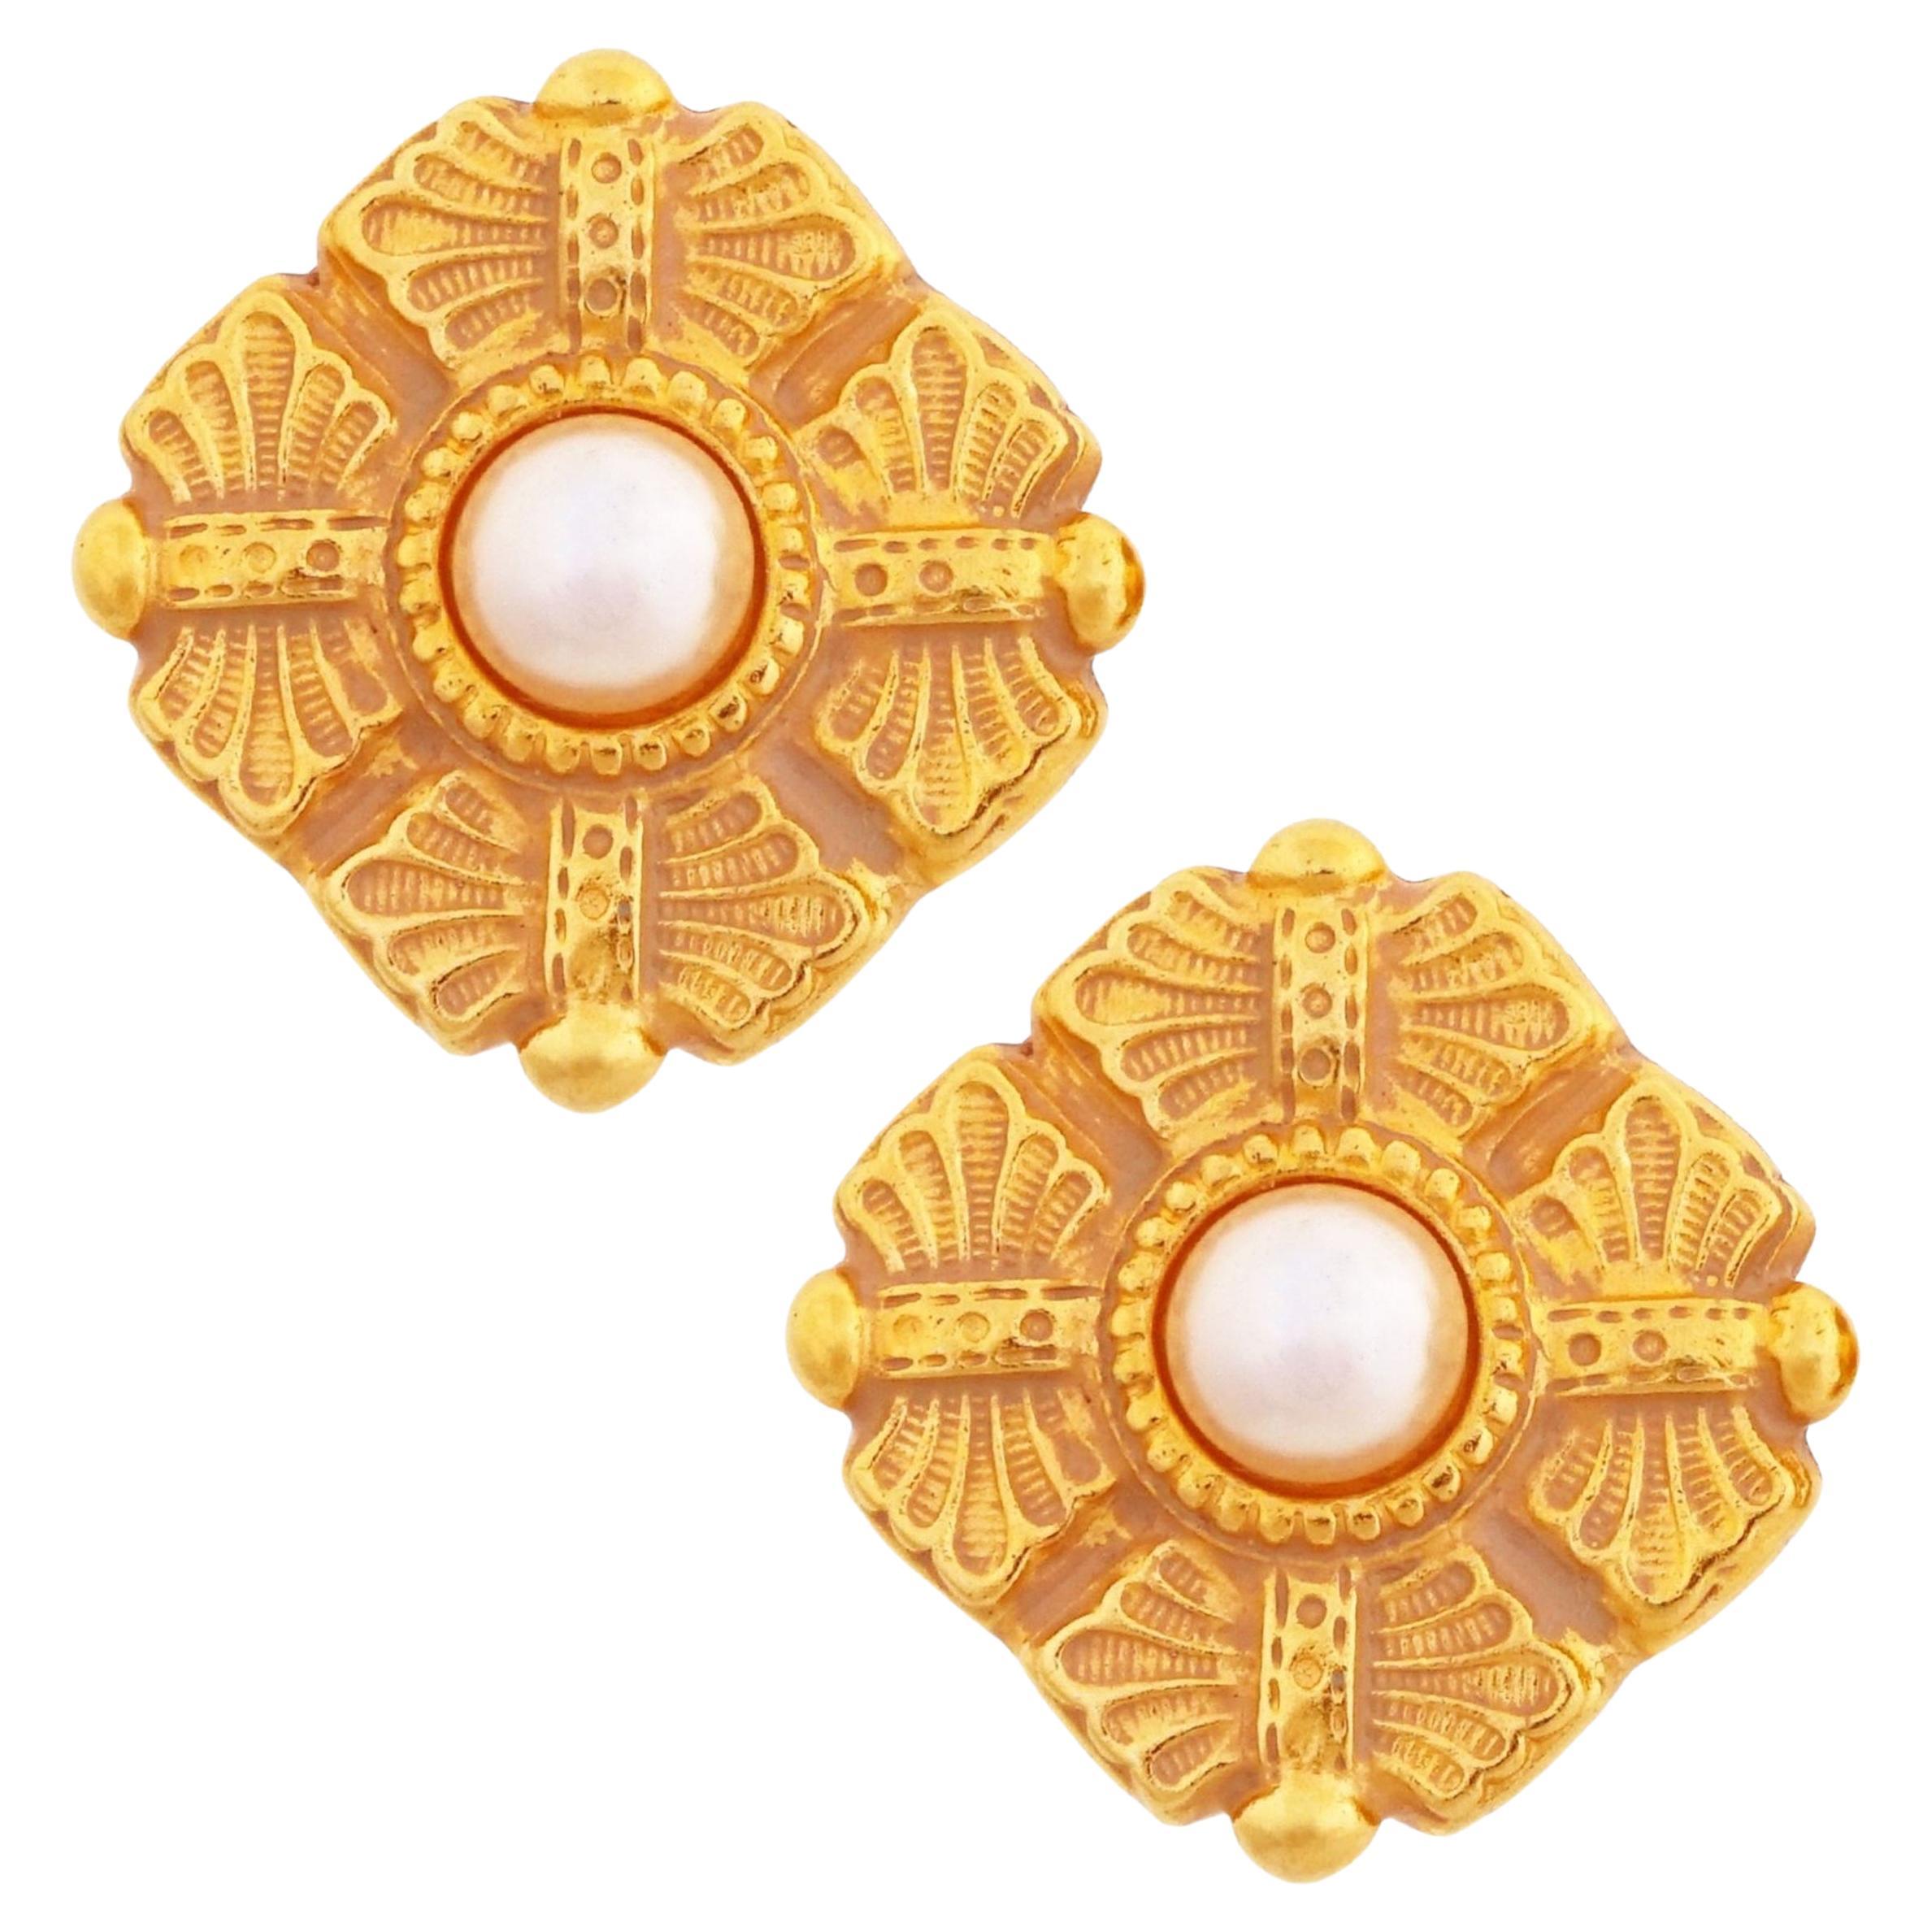 Gilded Etruscan Earrings With Faux Pearls By Ben-Amun, 1980s For Sale